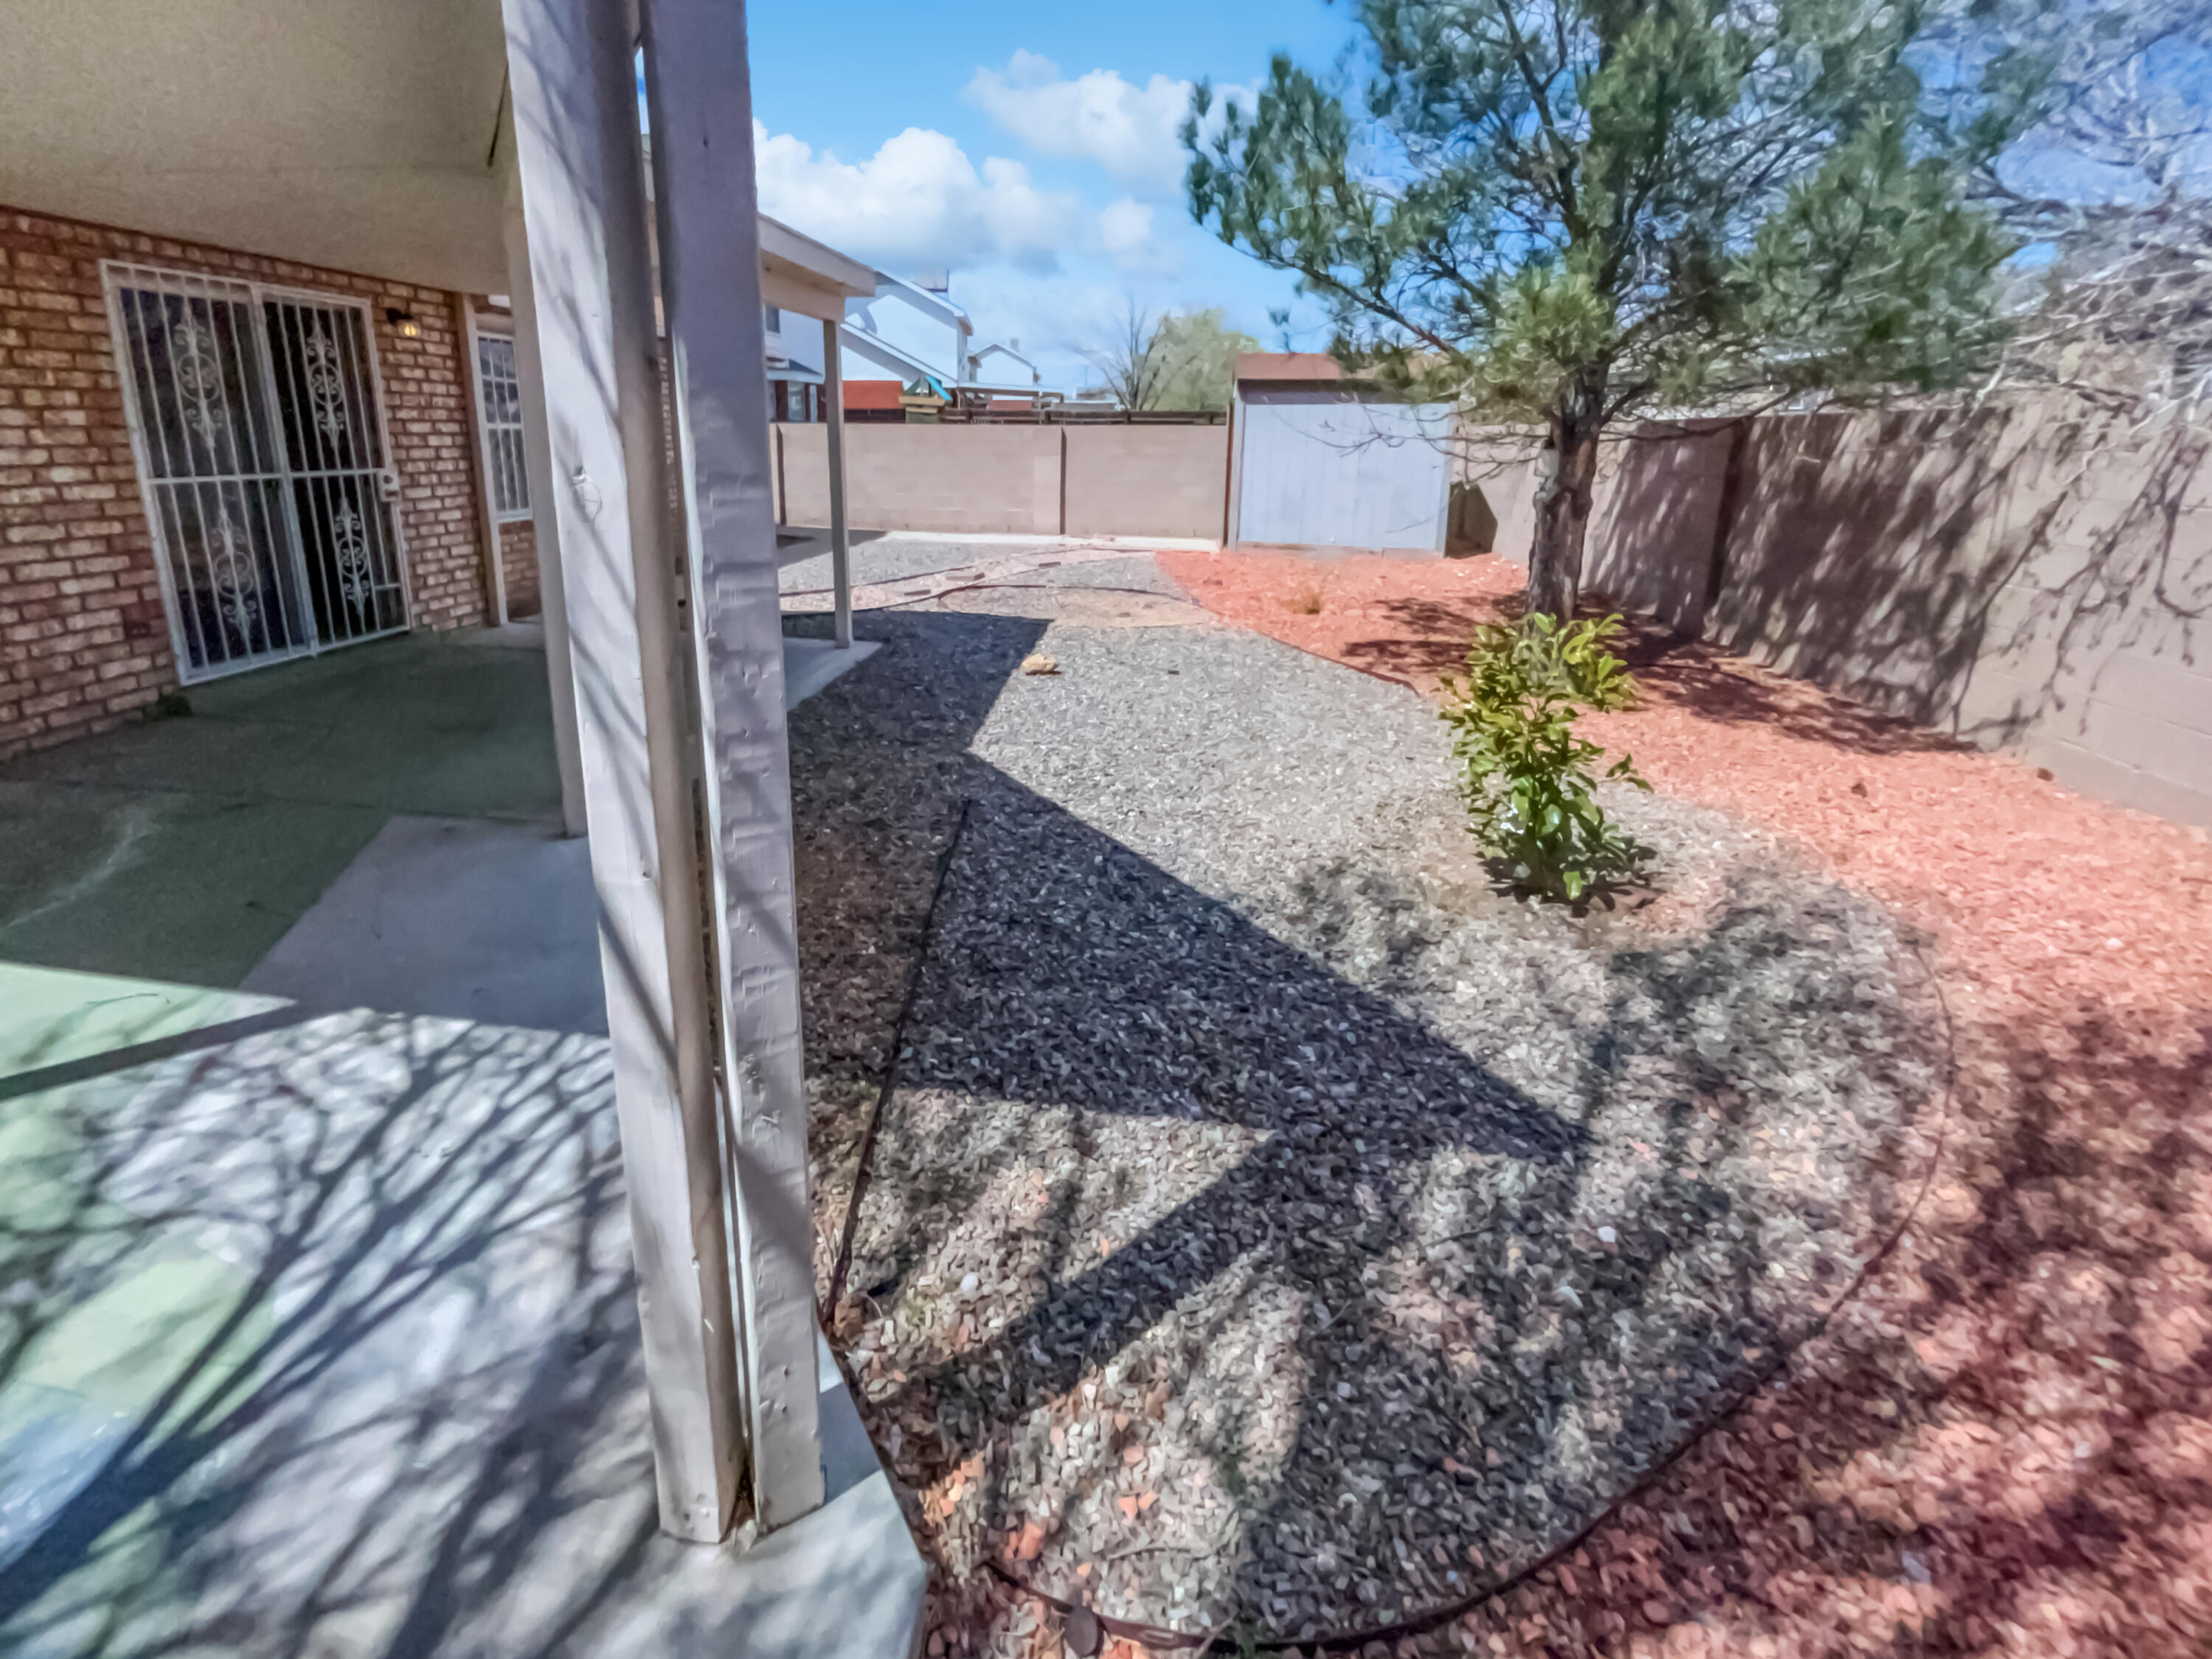 8119 Sheffield Place NW, Albuquerque, New Mexico 87120, 3 Bedrooms Bedrooms, ,2 BathroomsBathrooms,Residential,For Sale,8119 Sheffield Place NW,1059626